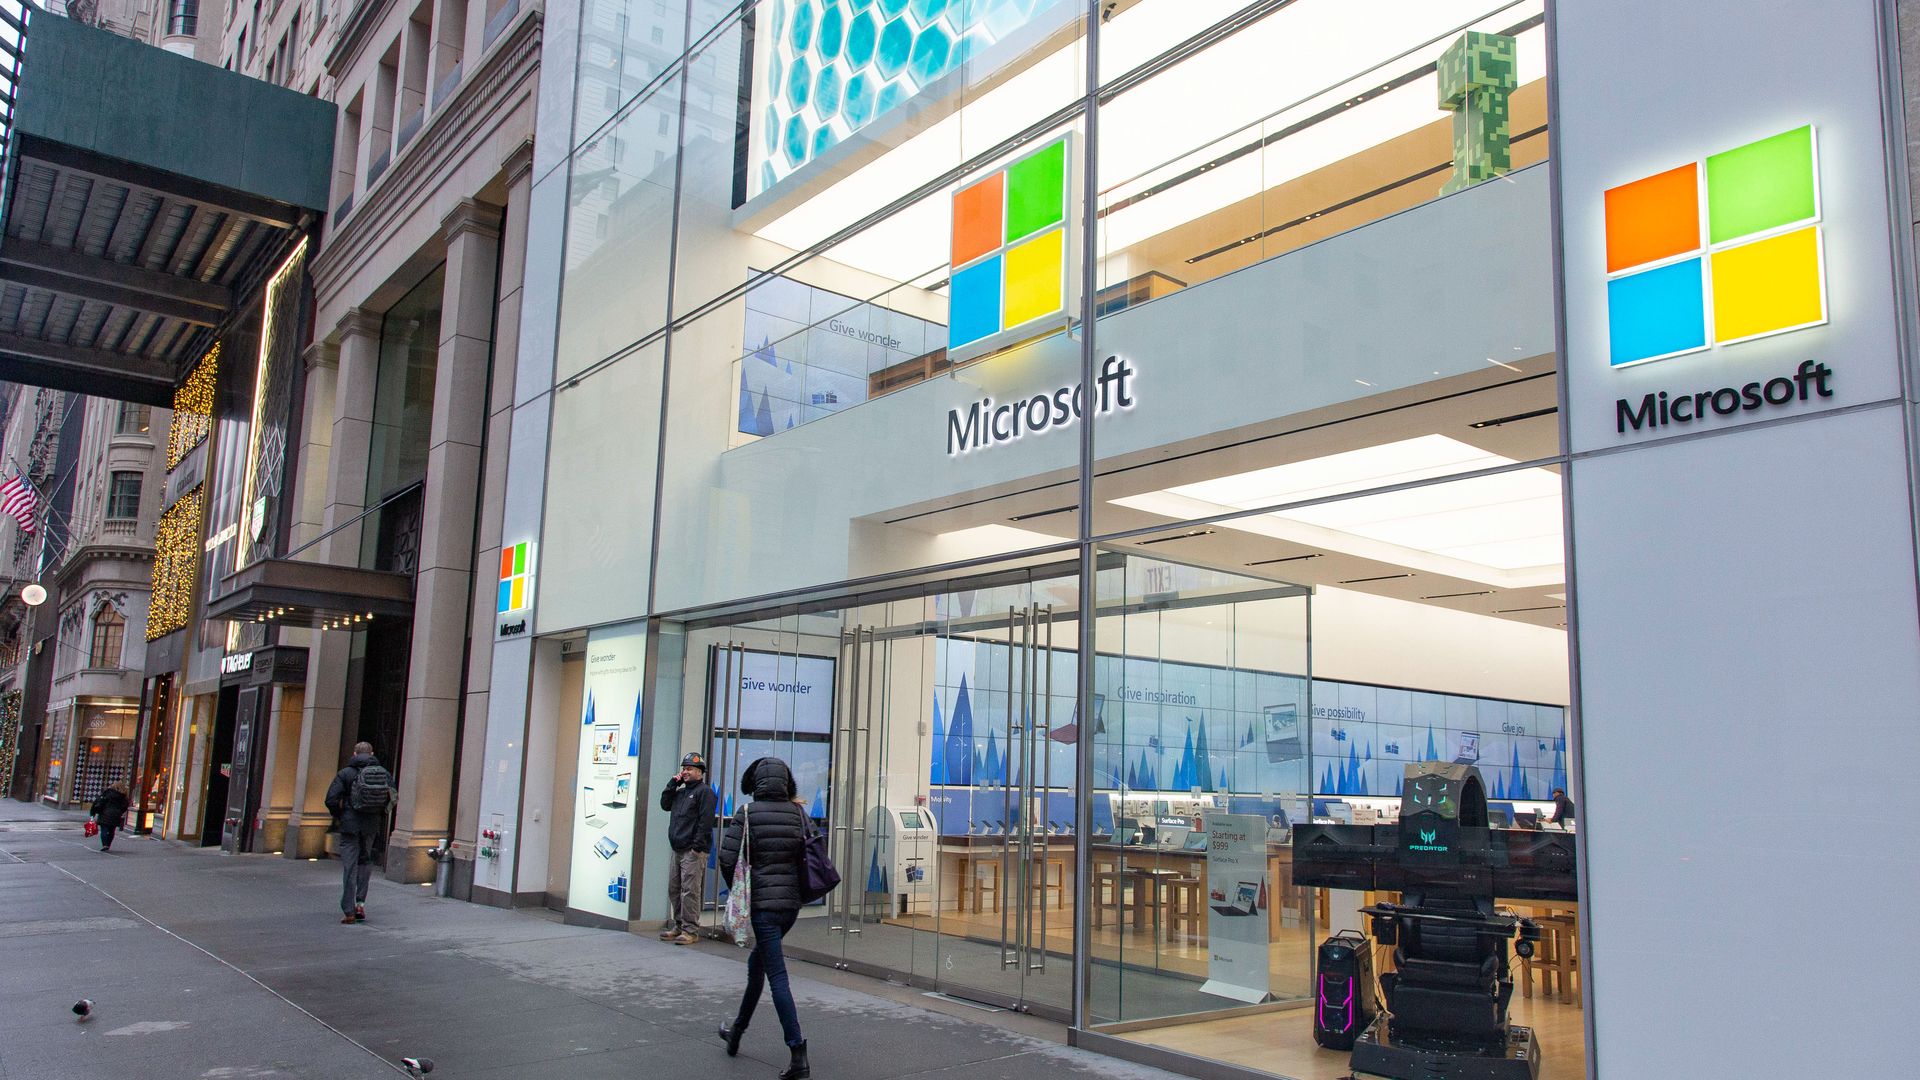 In this image, a woman walks past a Microsoft store